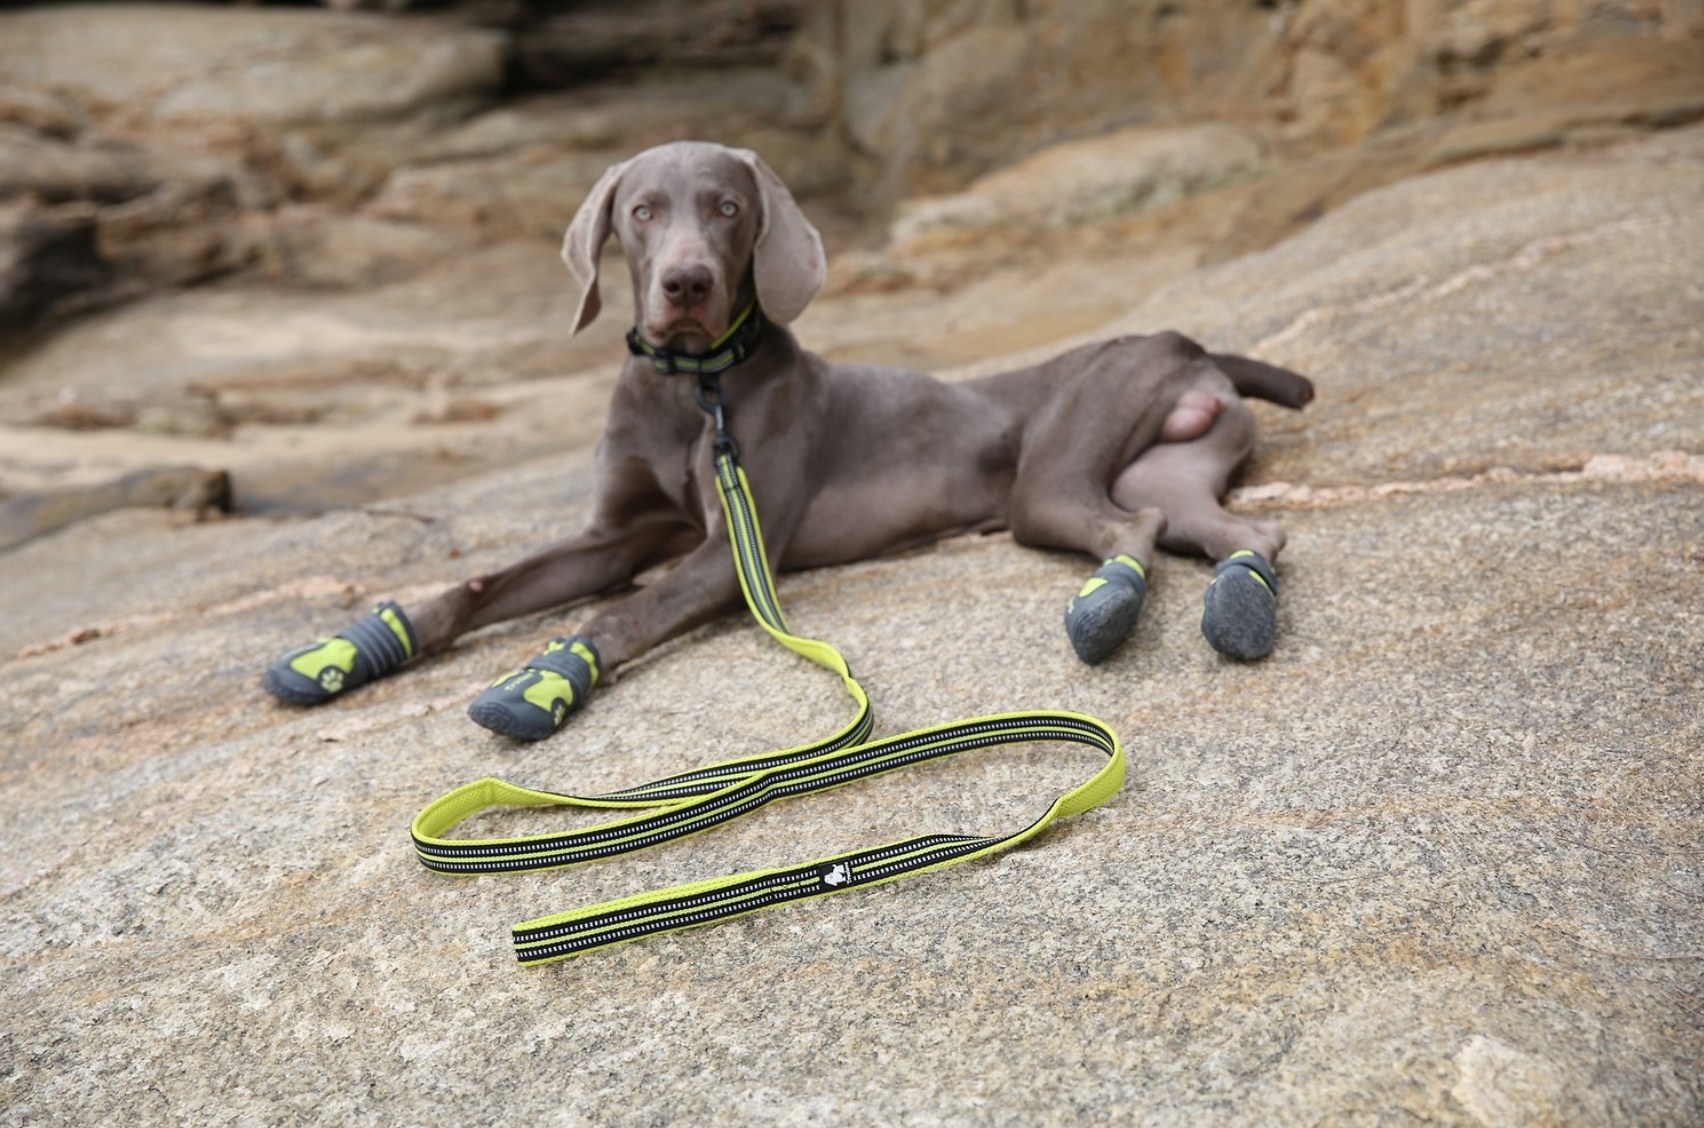 A brown dog with a green leash